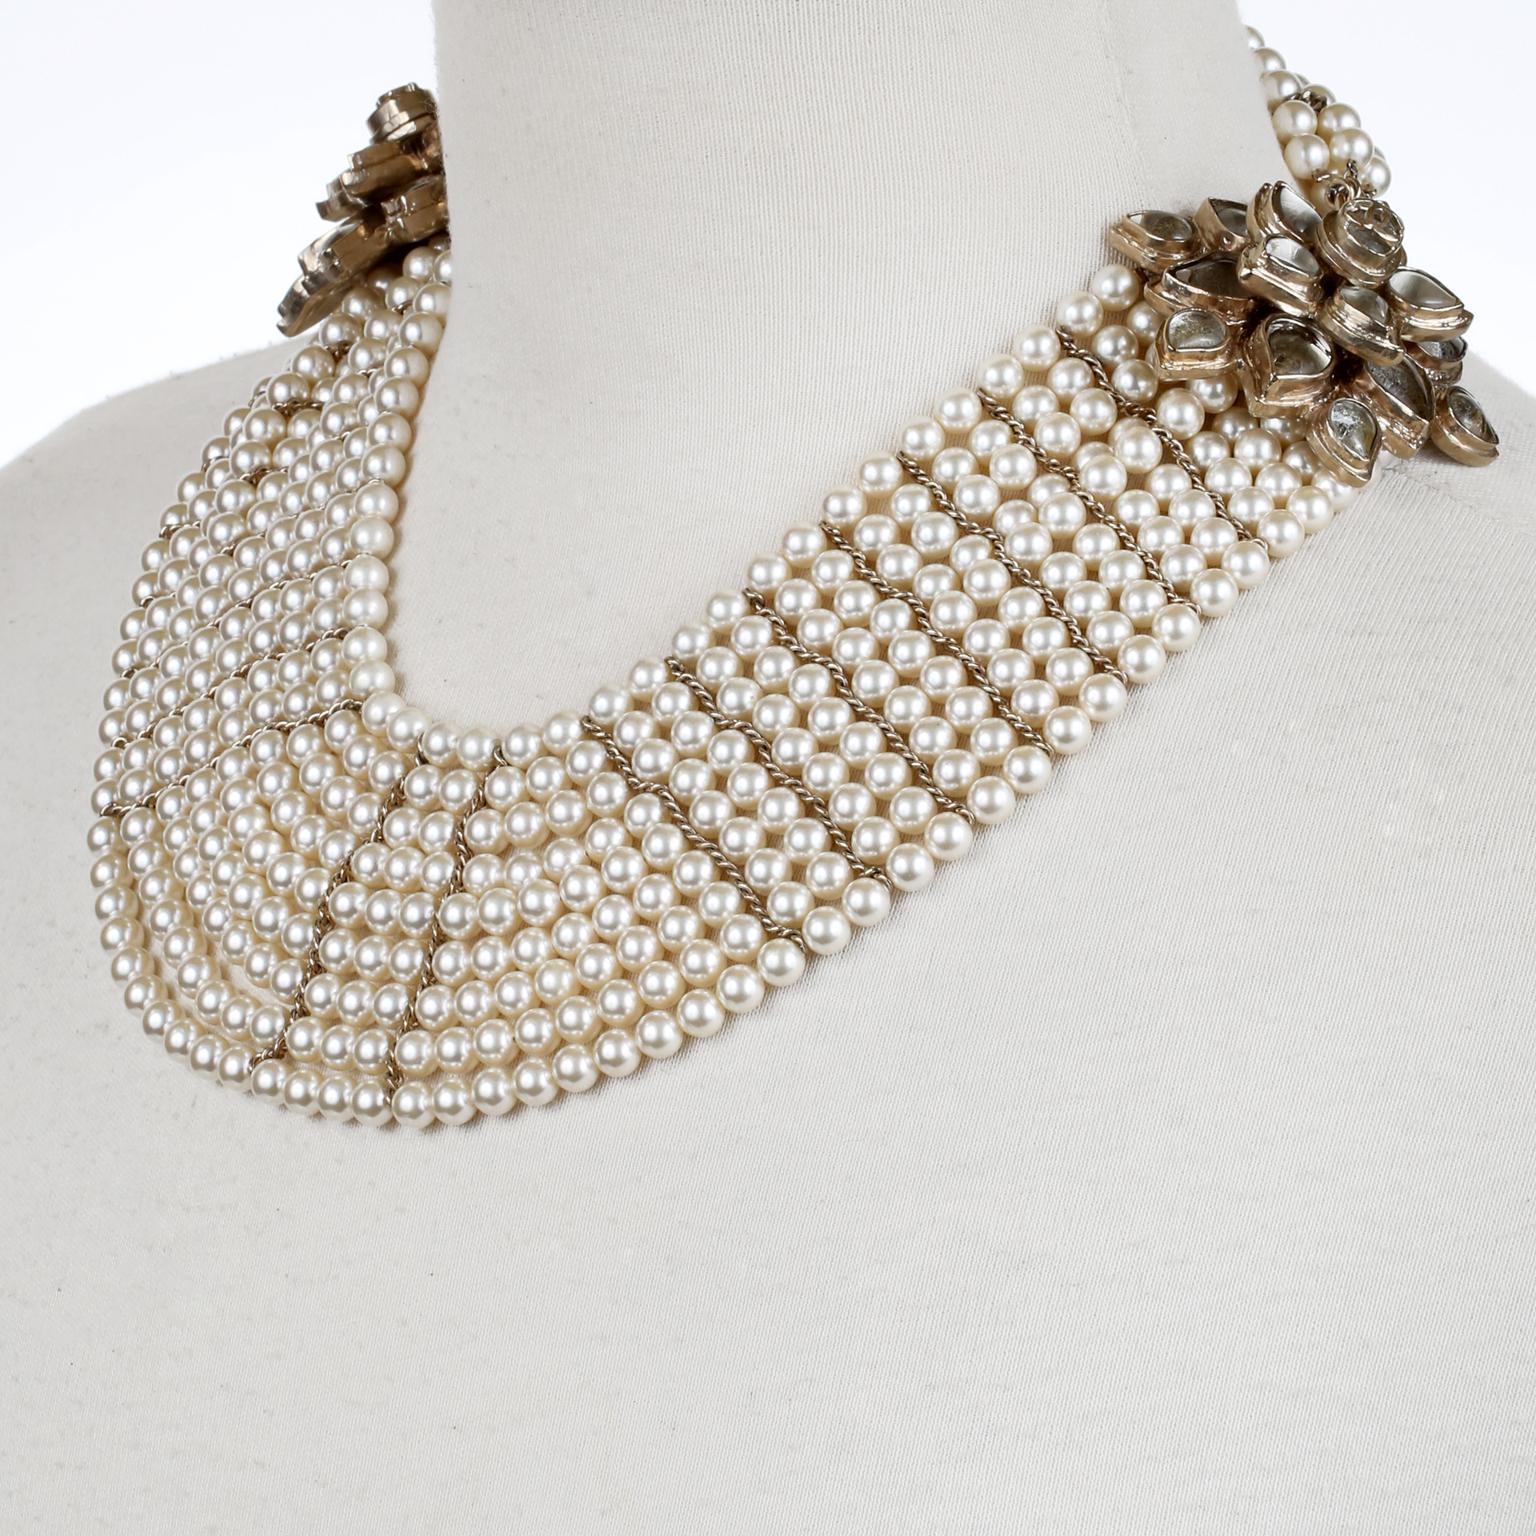 This authentic Chanel Multistrand Pearl Bib Necklace is in excellent condition.  A couture runway piece, this striking choker is certain to become a favorite in any collection.   
Nine strands of faux pearls drape beautifully in this dramatic bib